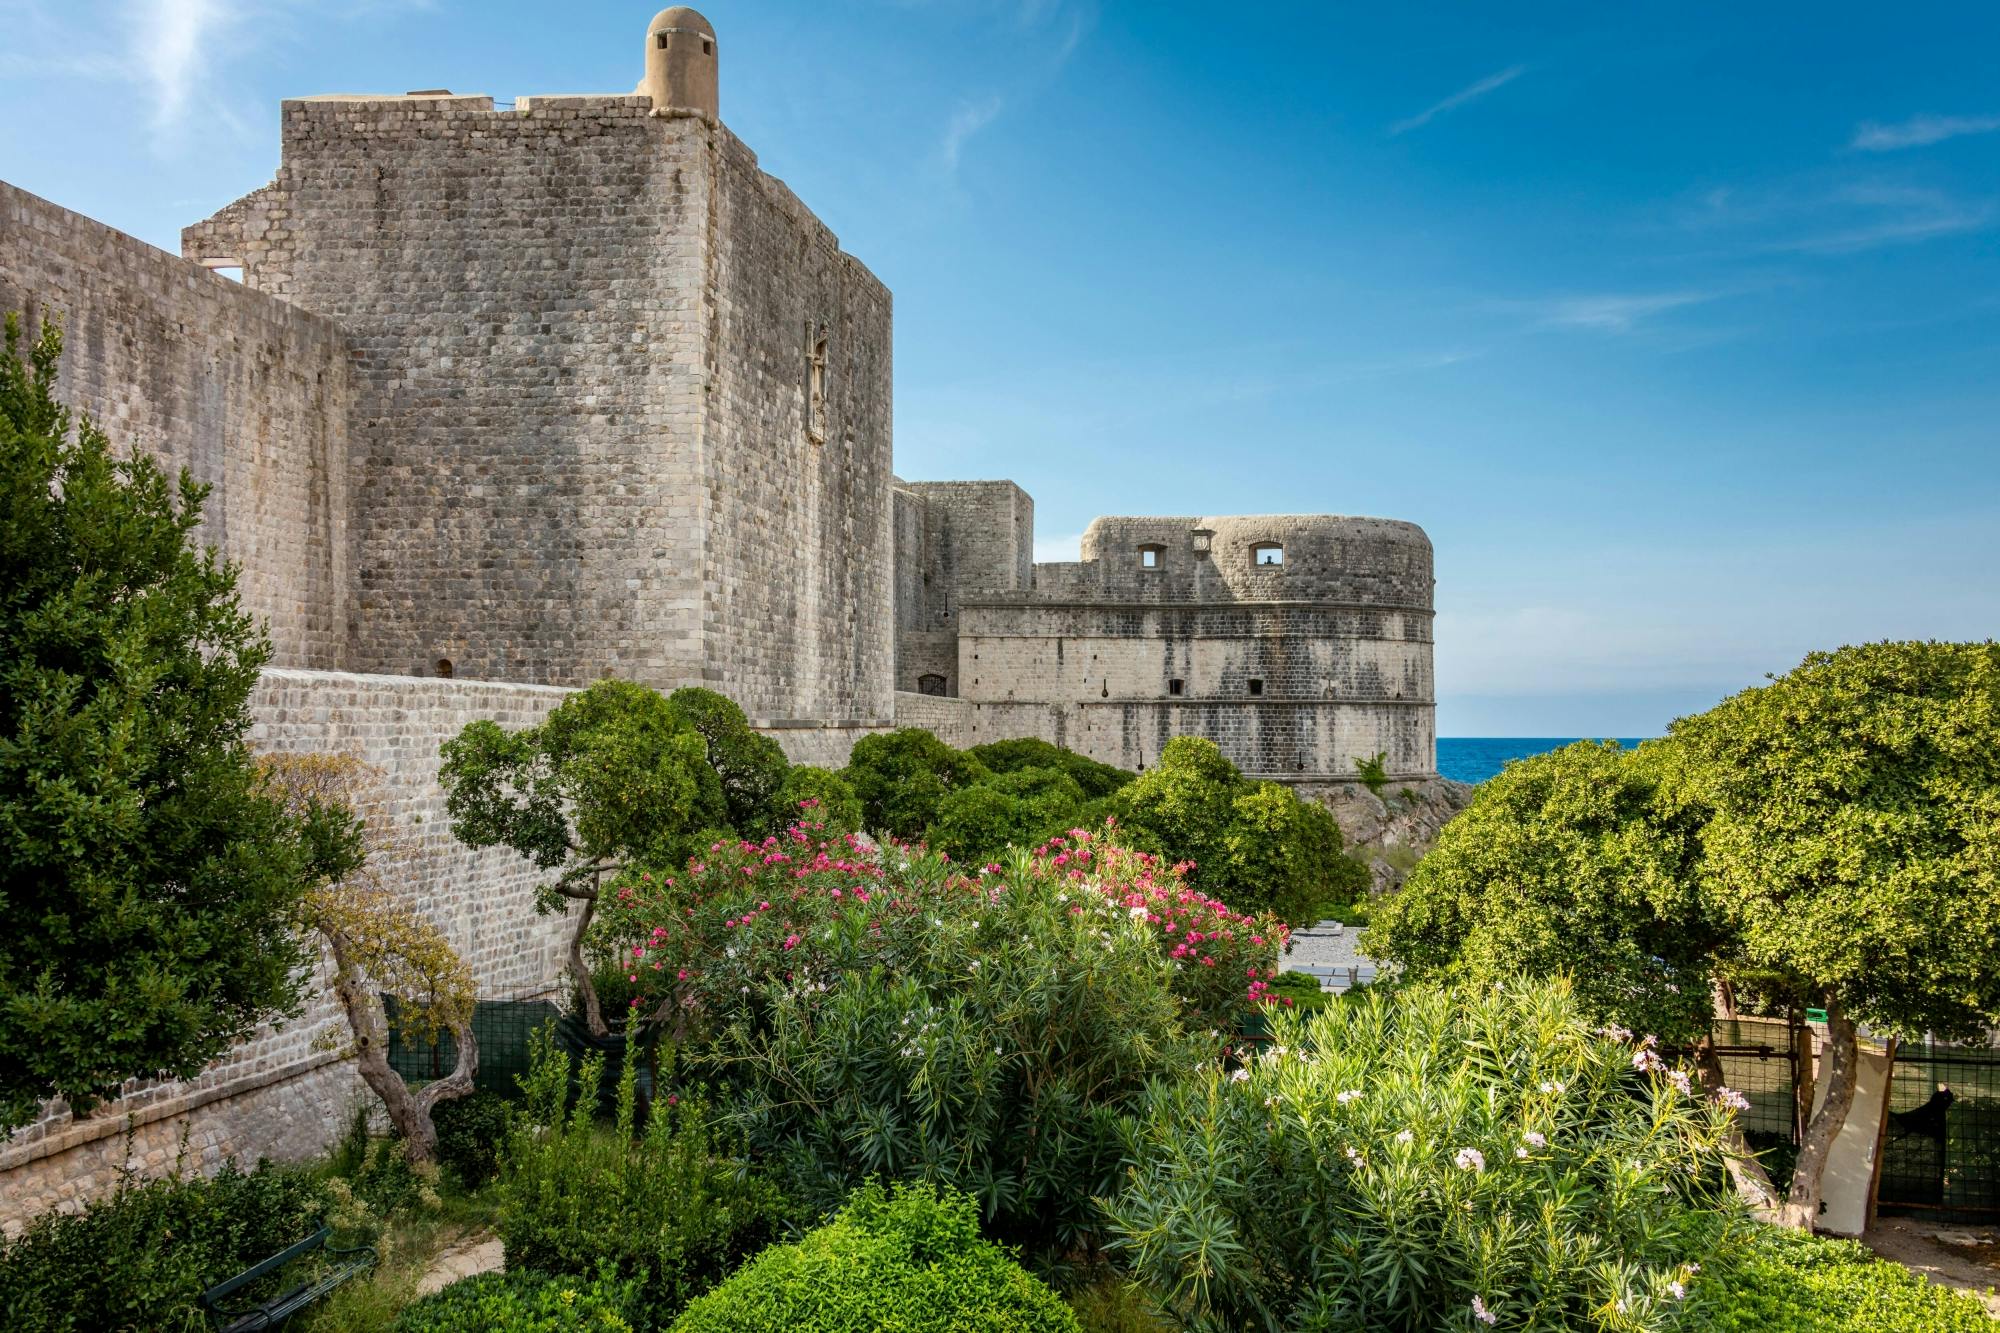 Game of Thrones King's Landing Filming Locations Tour